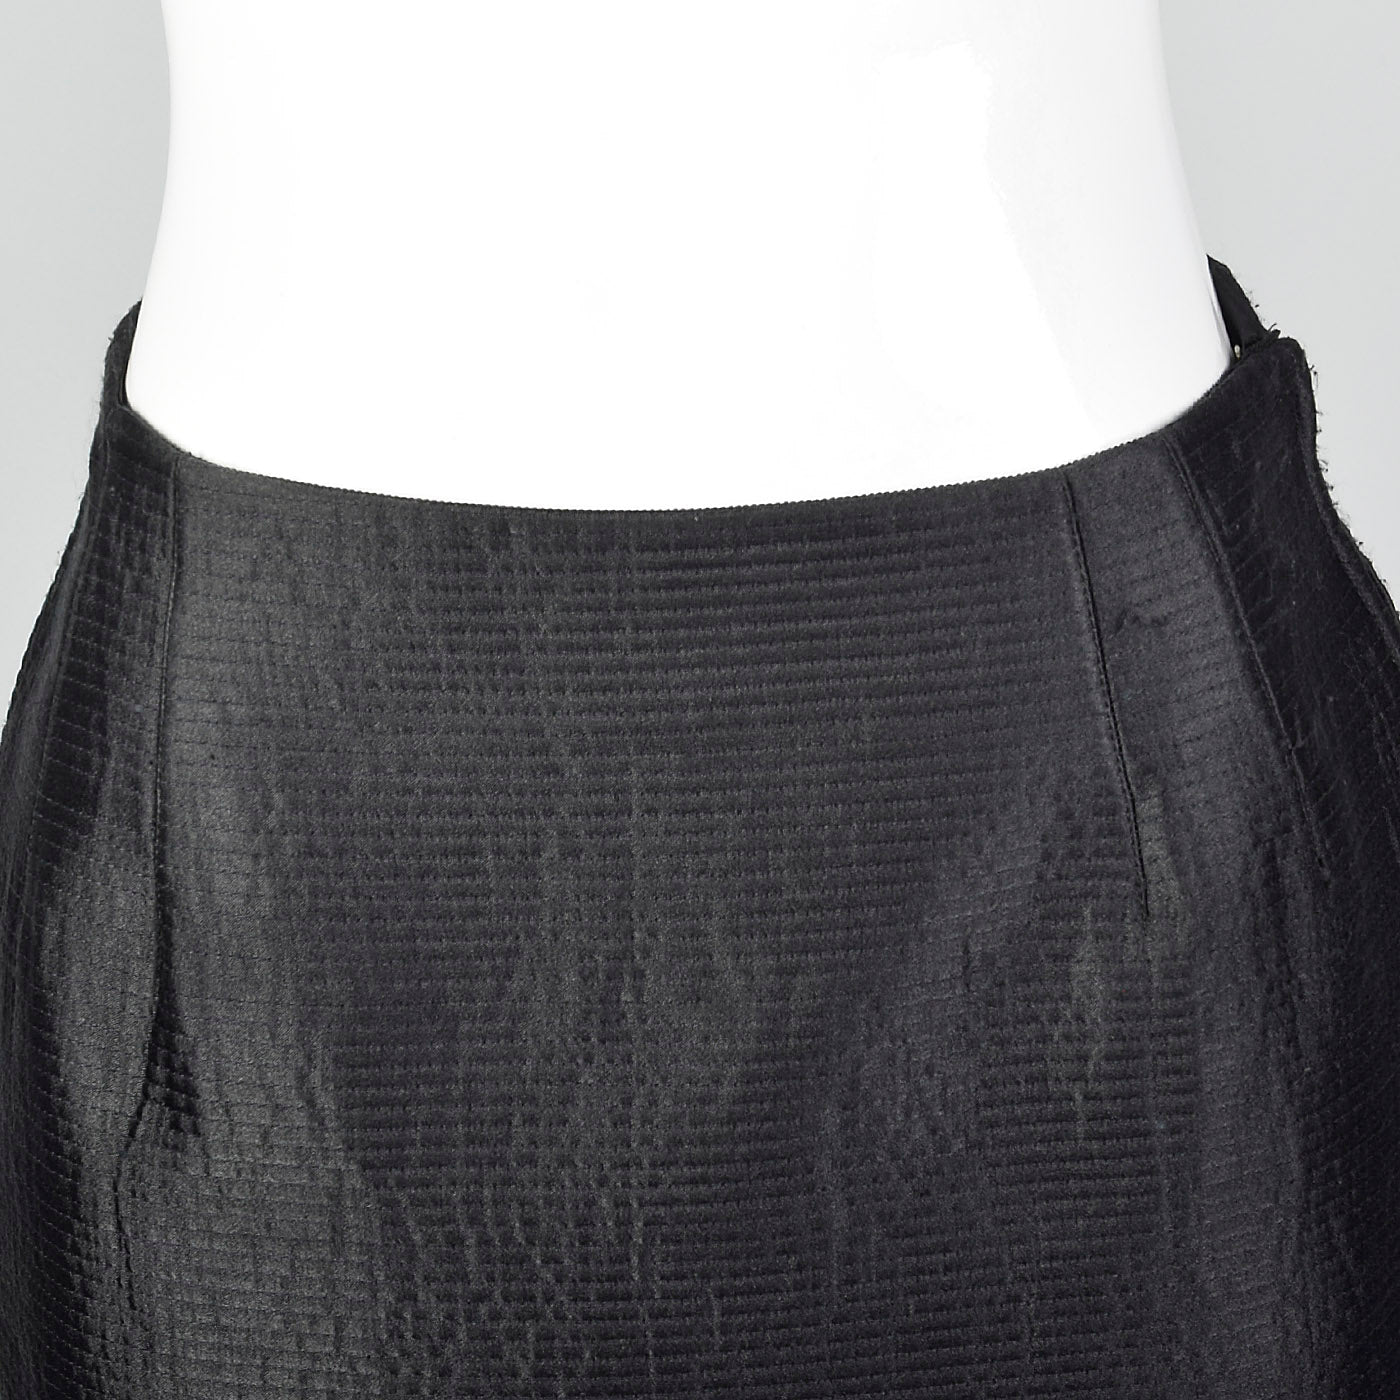 1990s Mary McFadden Couture Black Pencil Skirt With Horizontal Stitching